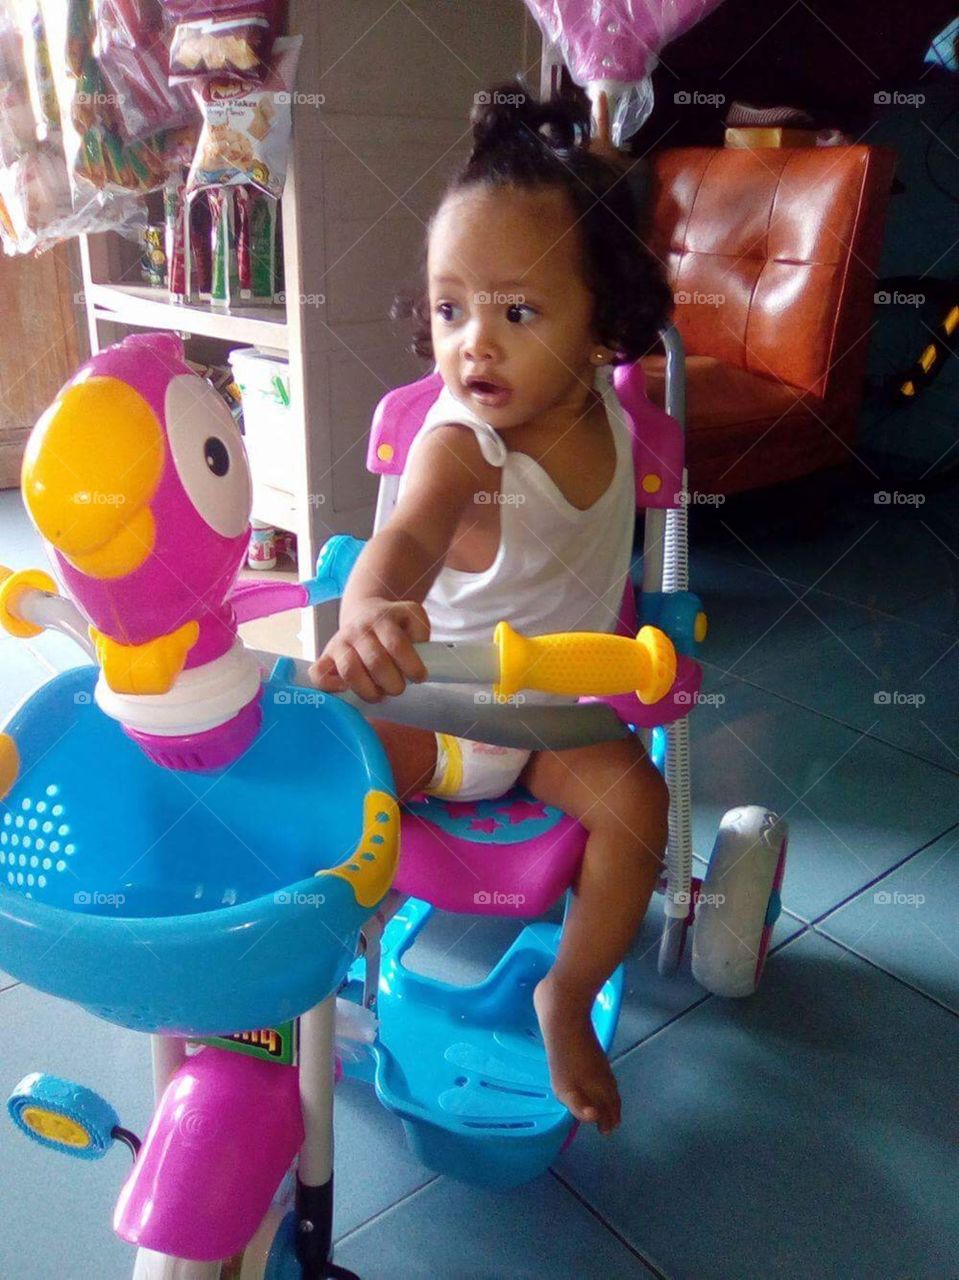 Our daughter Mary receiving her first tricycle in Philippines on her 1st birthday.